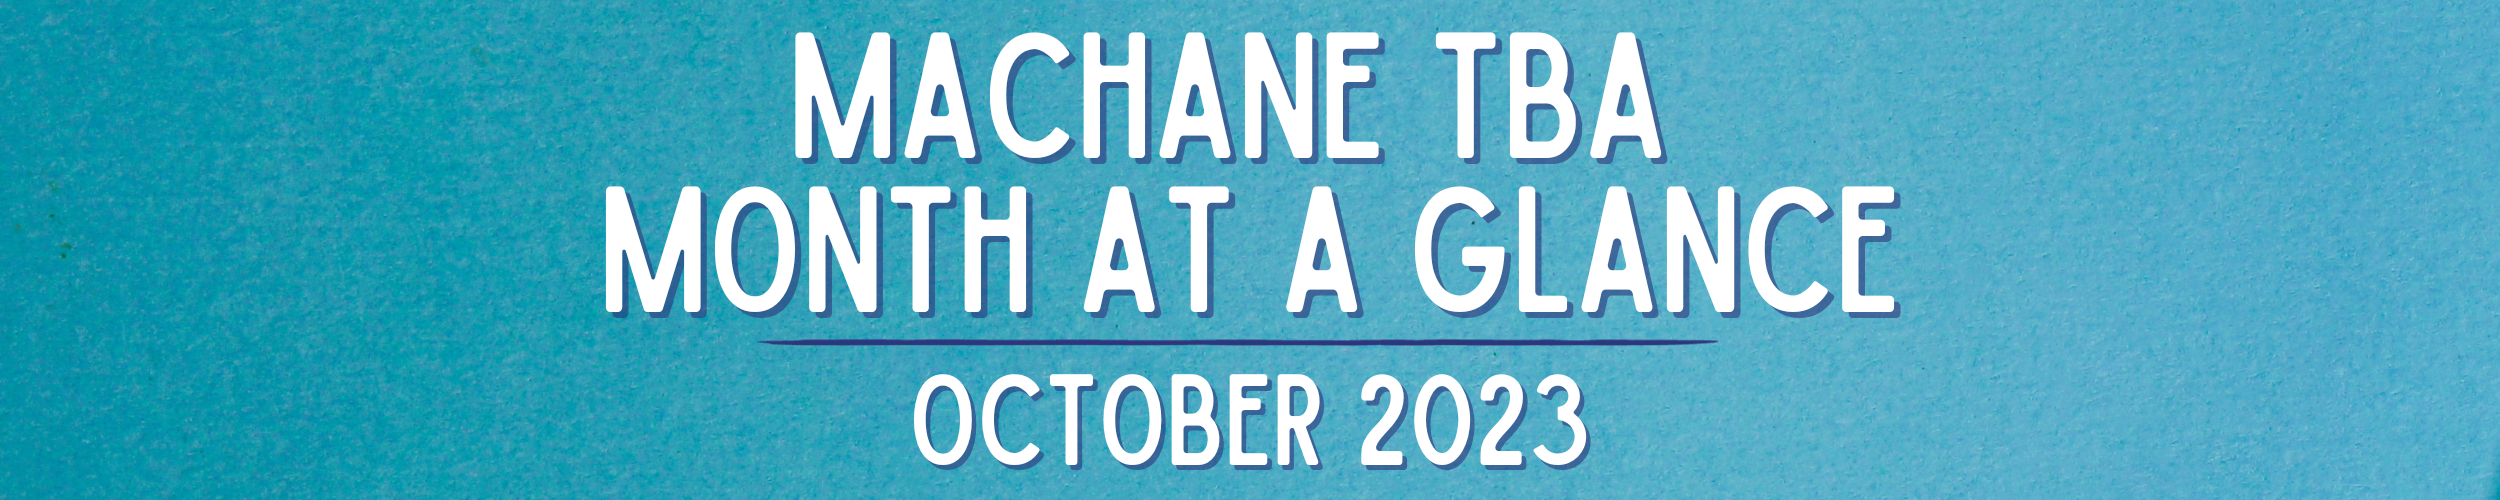 Machane TBA Month at a Glance October 2023 (1)